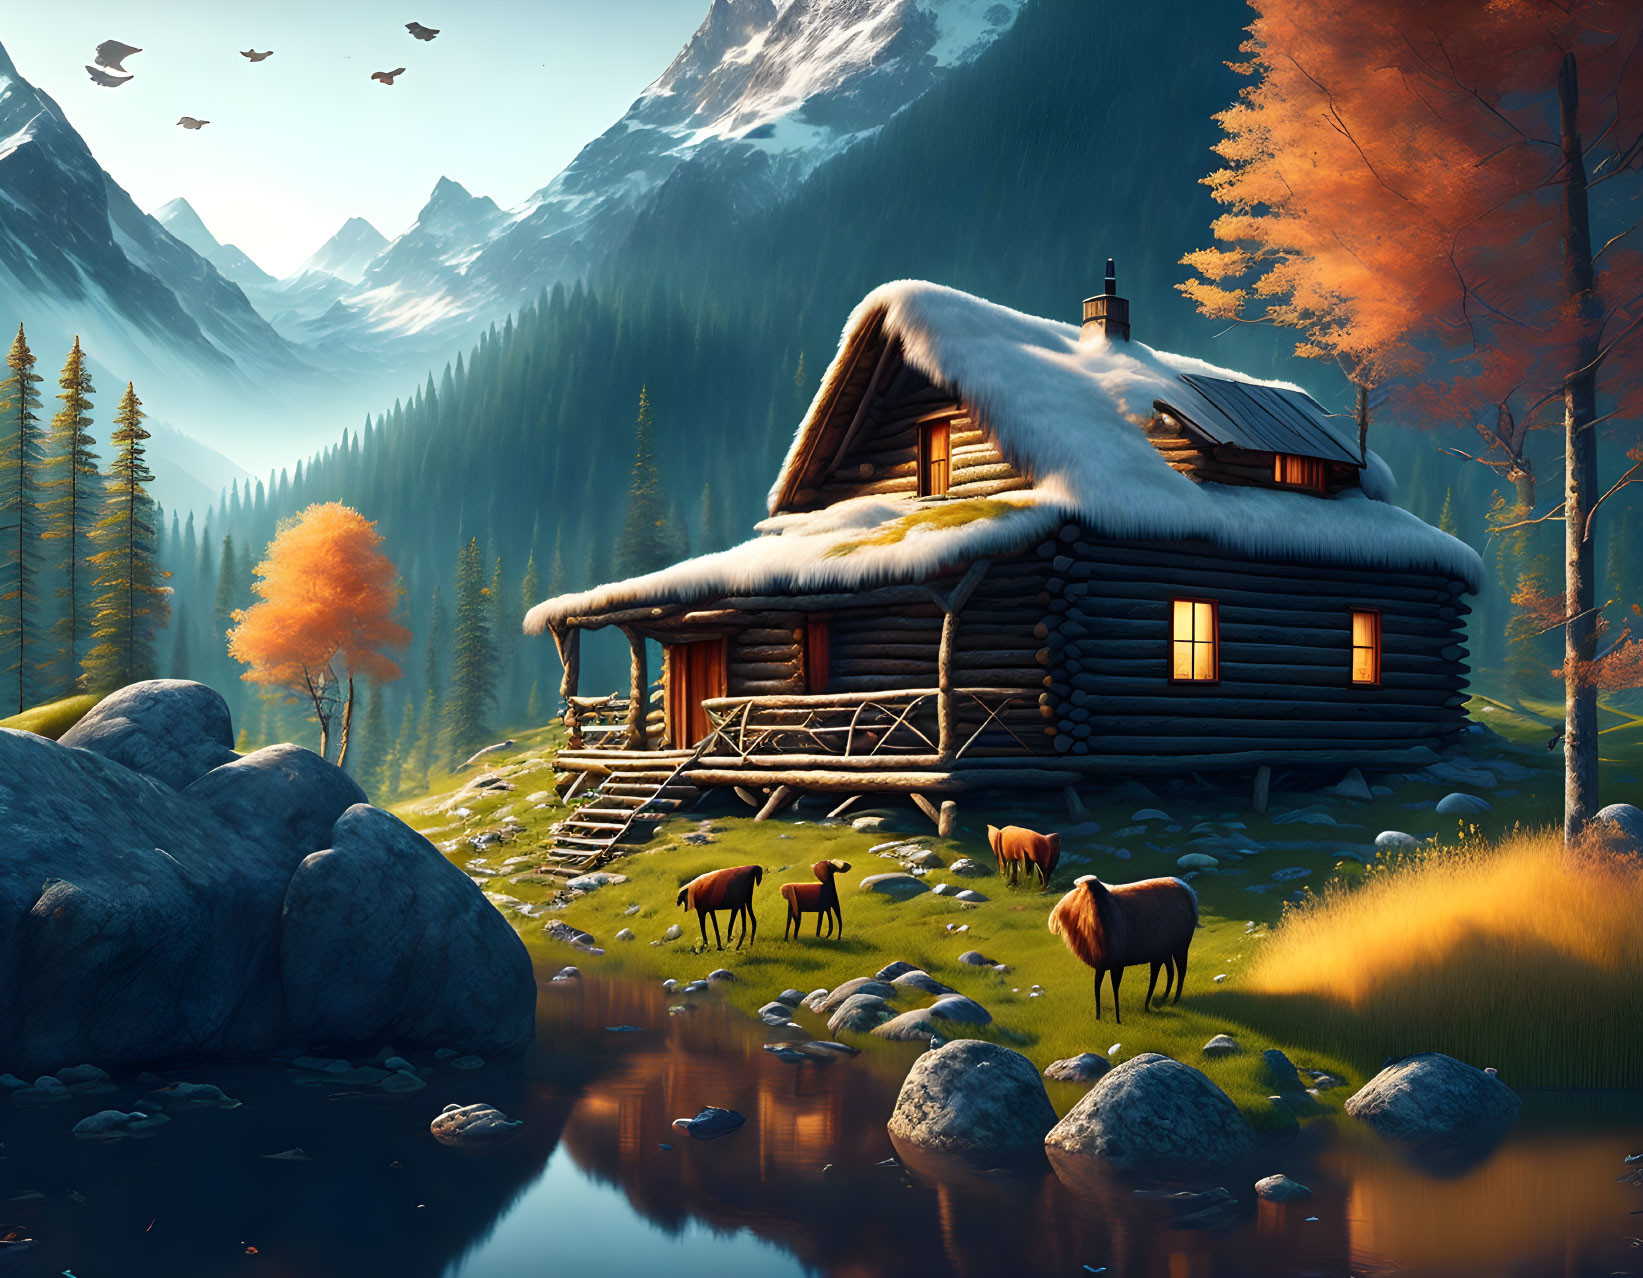 Tranquil autumn landscape with log cabin, lake, forests, mountains, wildlife, and birds.